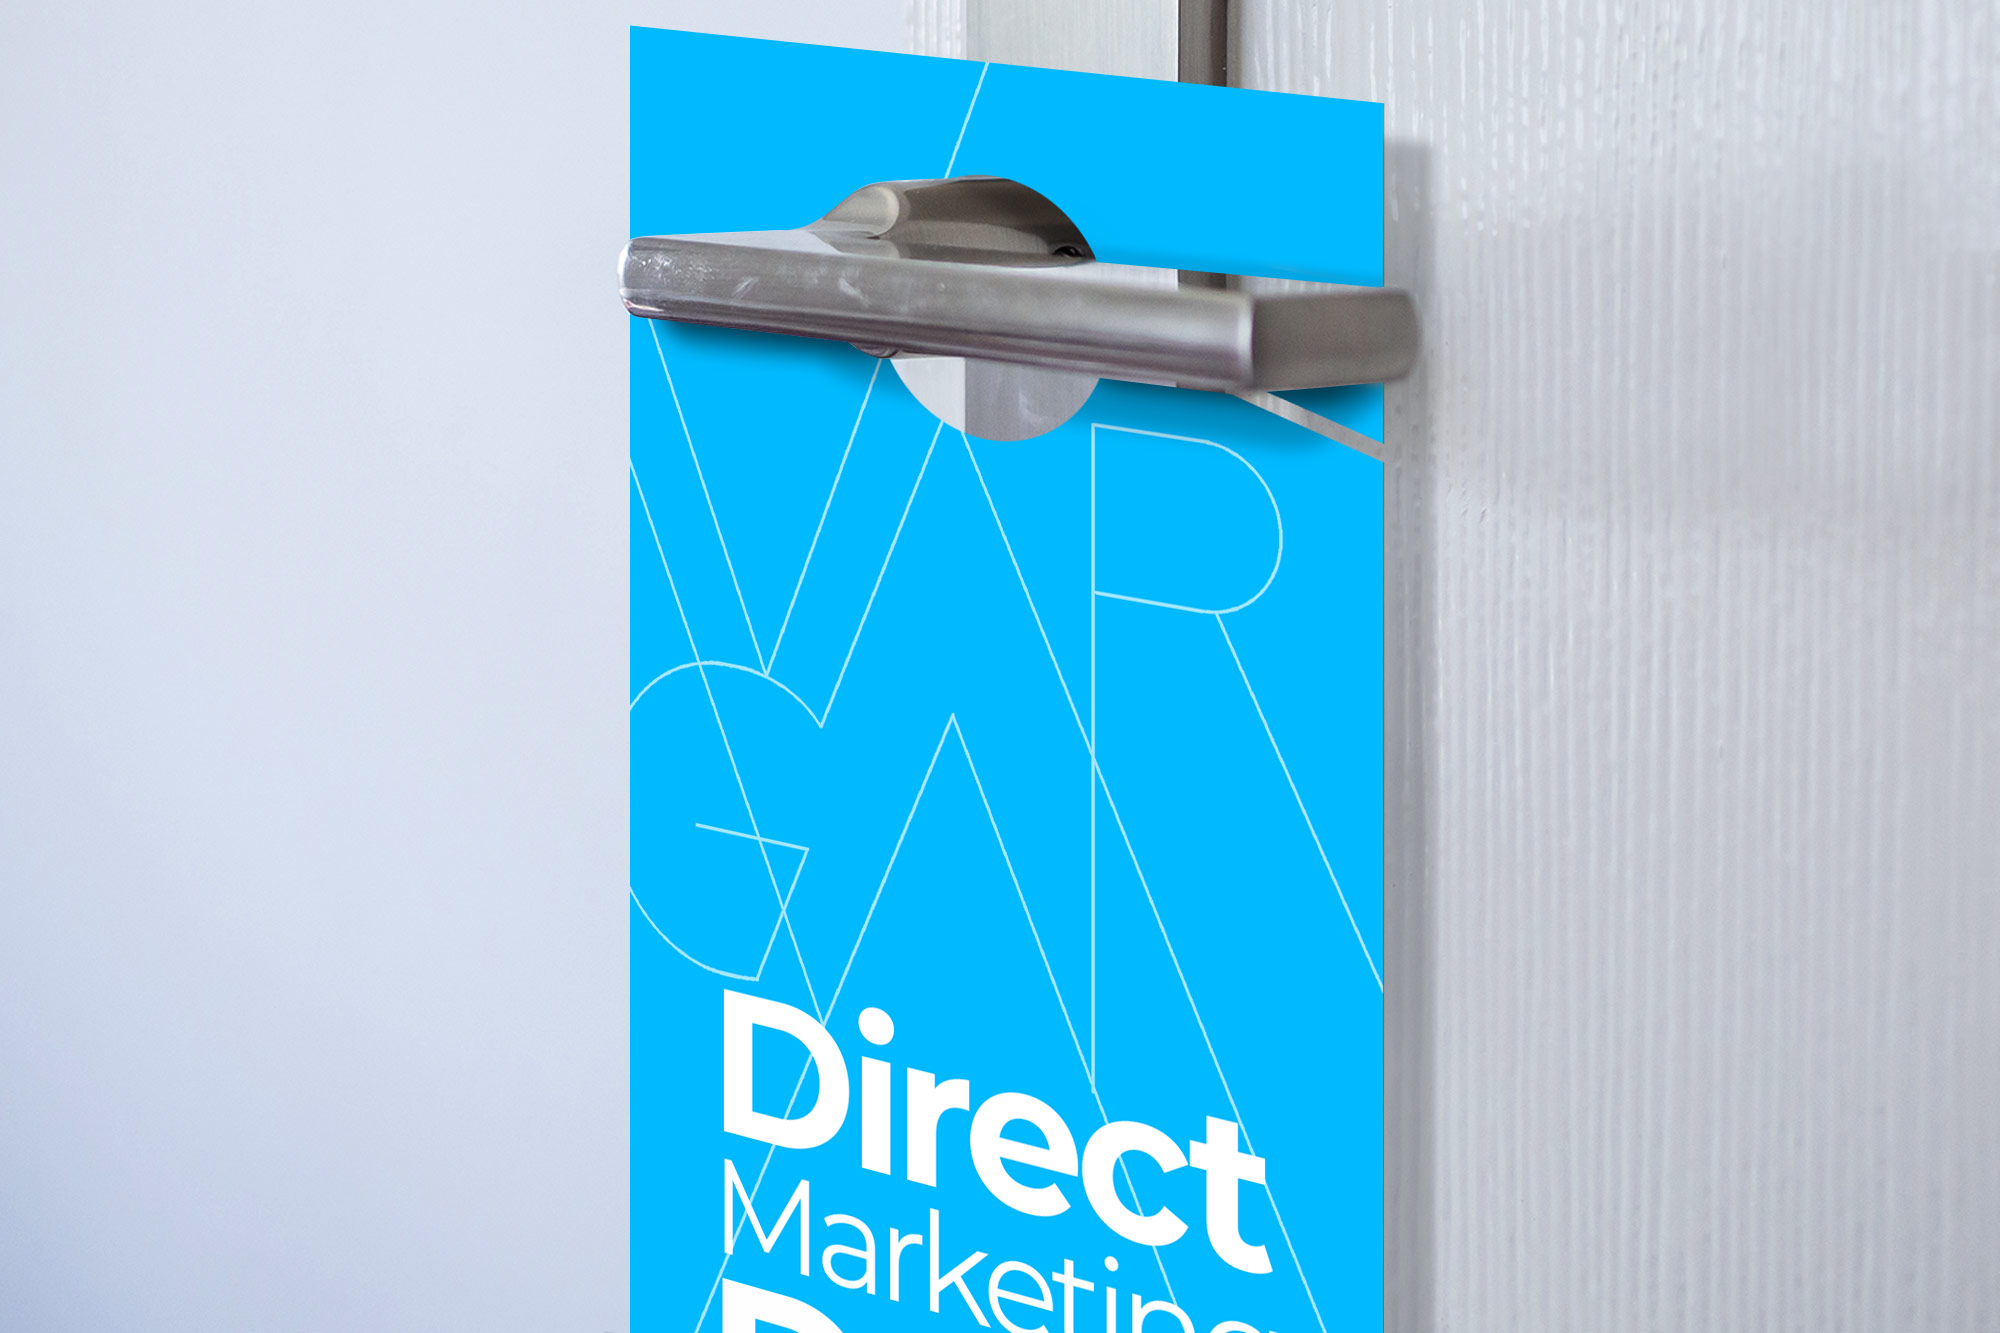 A National Leader in Direct Marketing for Over 15 Years